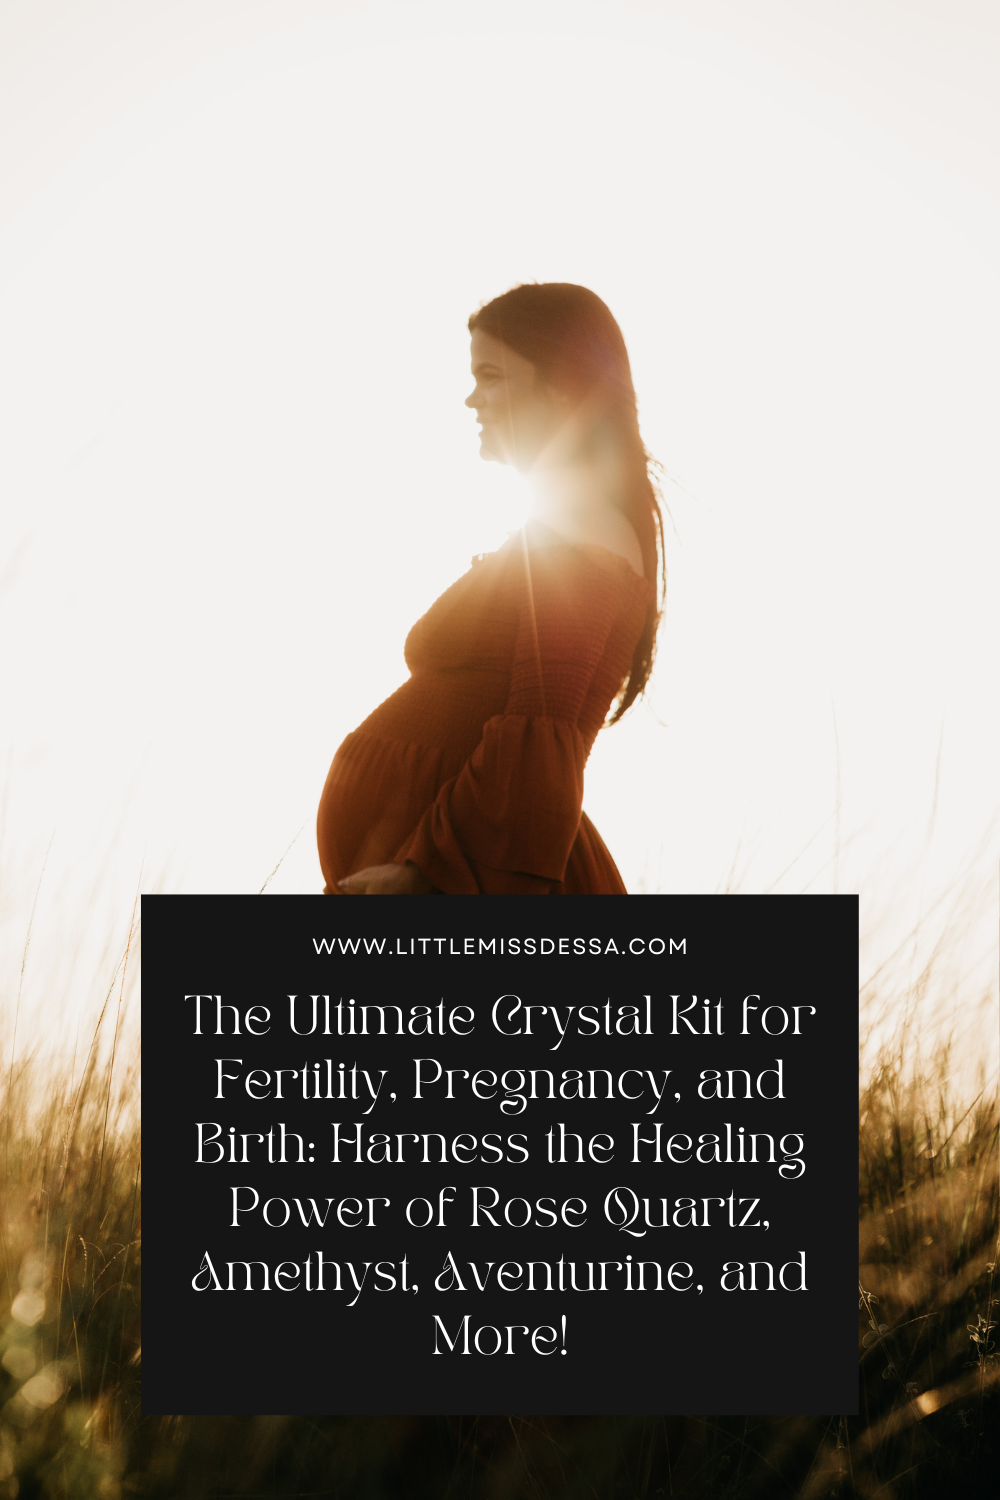 The Ultimate Crystal Kit for Fertility, Pregnancy, and Birth: Harness the Healing Power of Rose Quartz, Amethyst, Aventurine, and More!